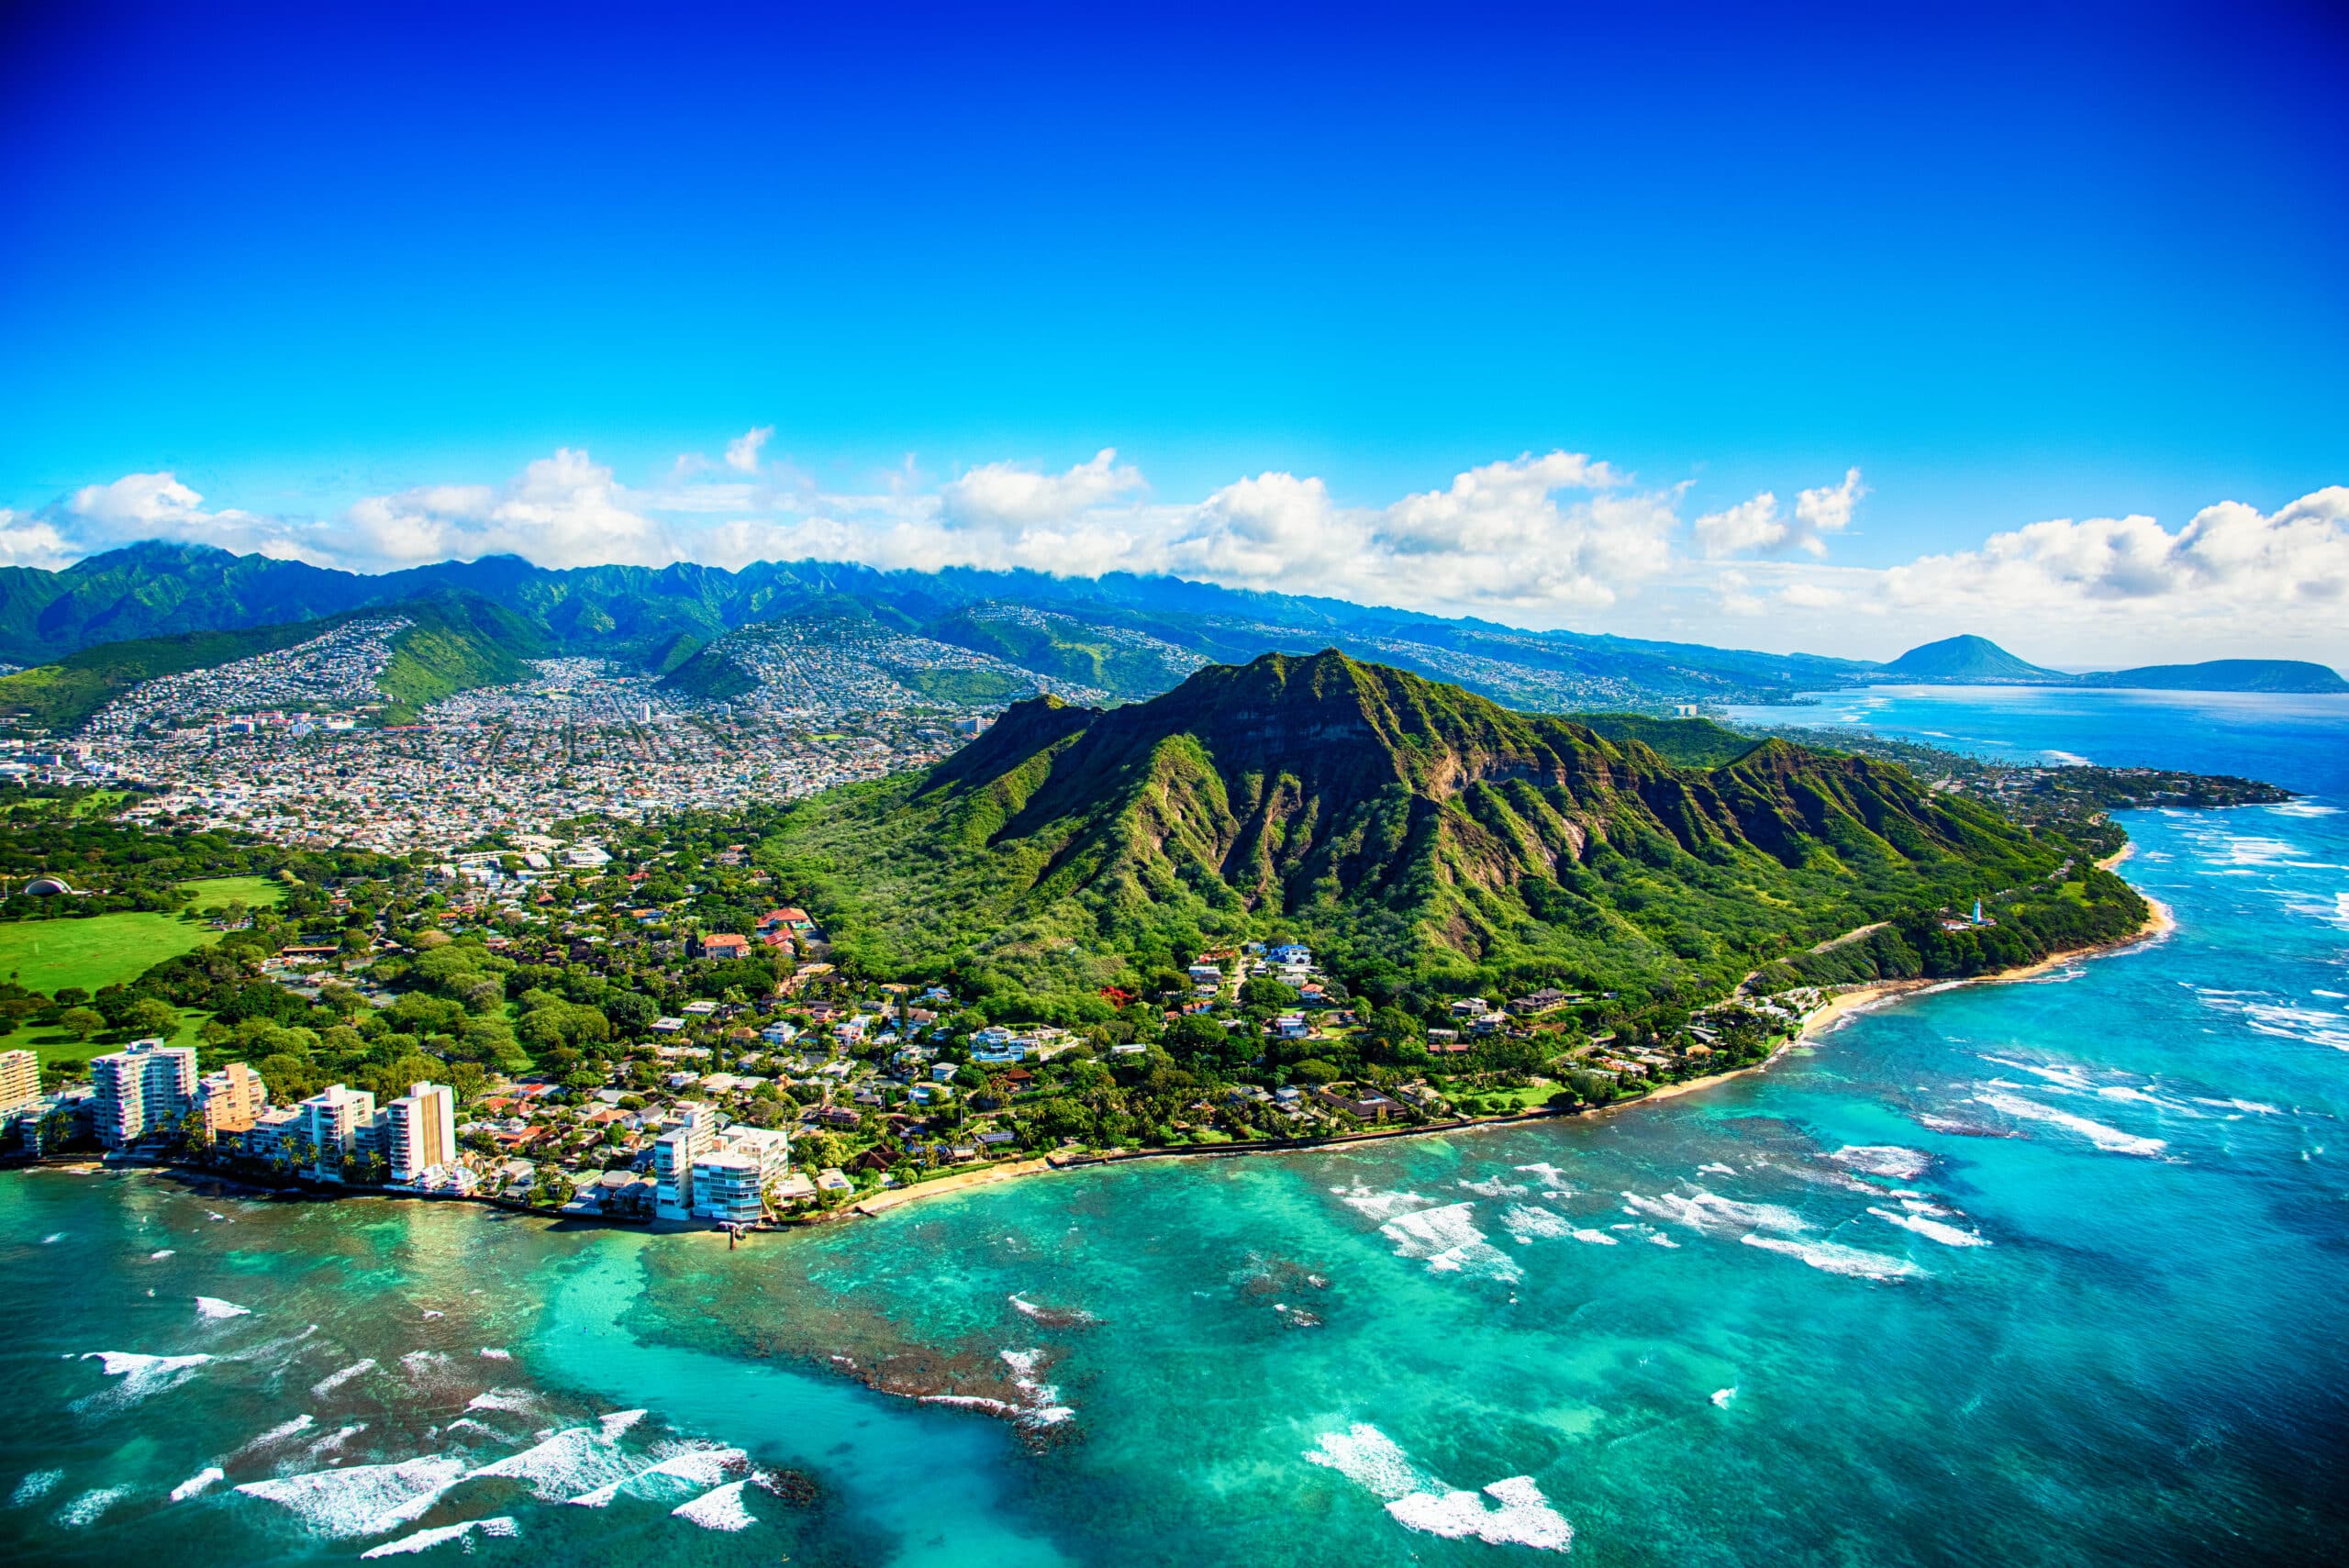 The dormant volcano known as Diamond Head located adjacent to downtown Honlulu, Hawai